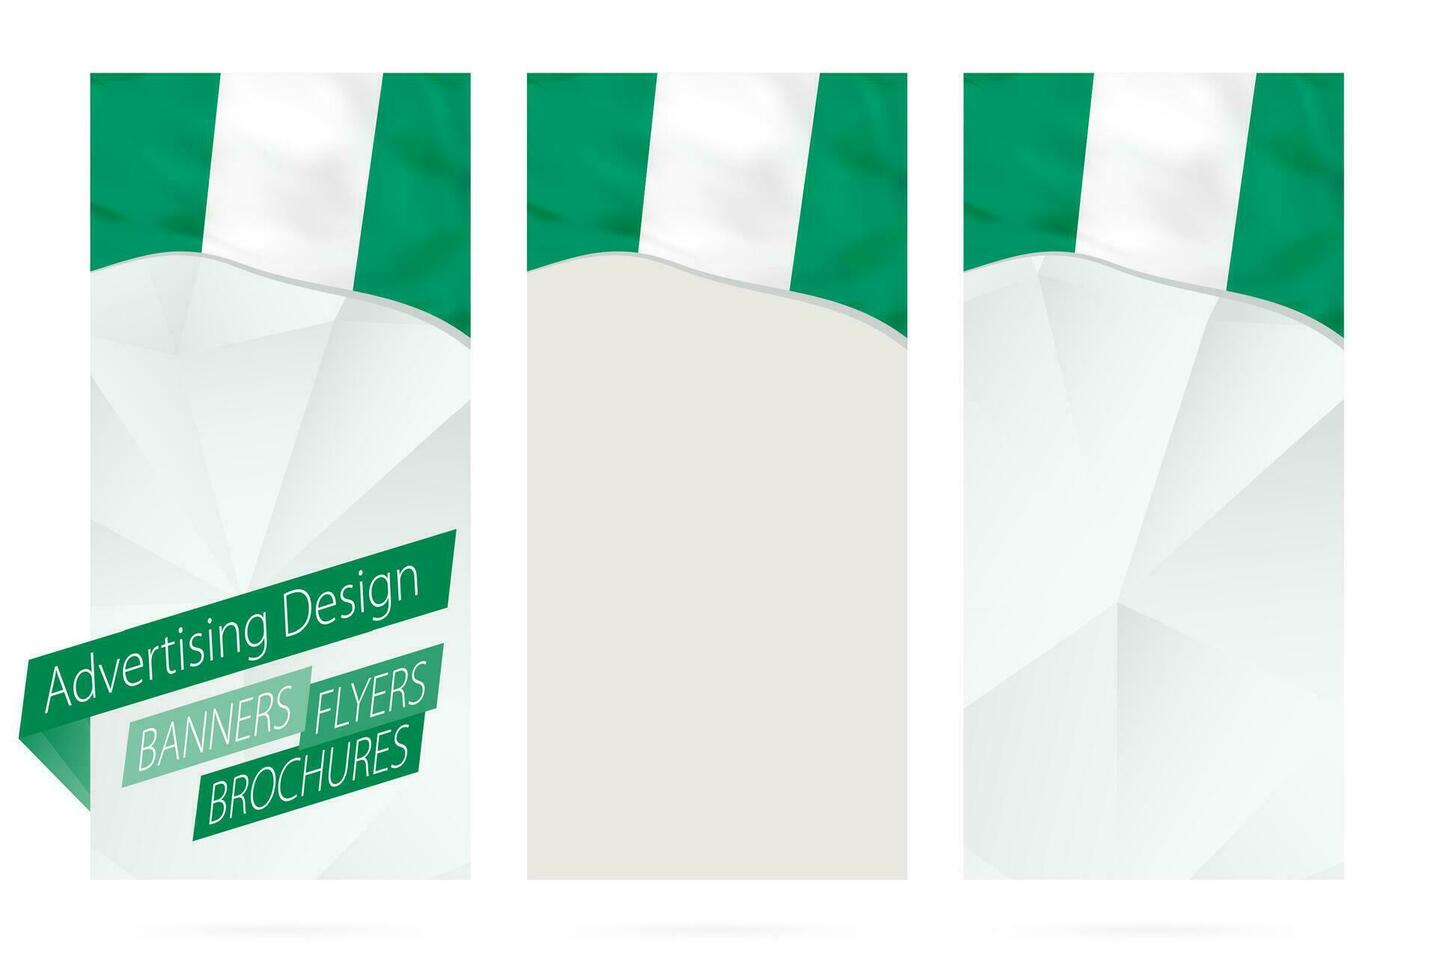 Design of banners, flyers, brochures with flag of Nigeria. vector